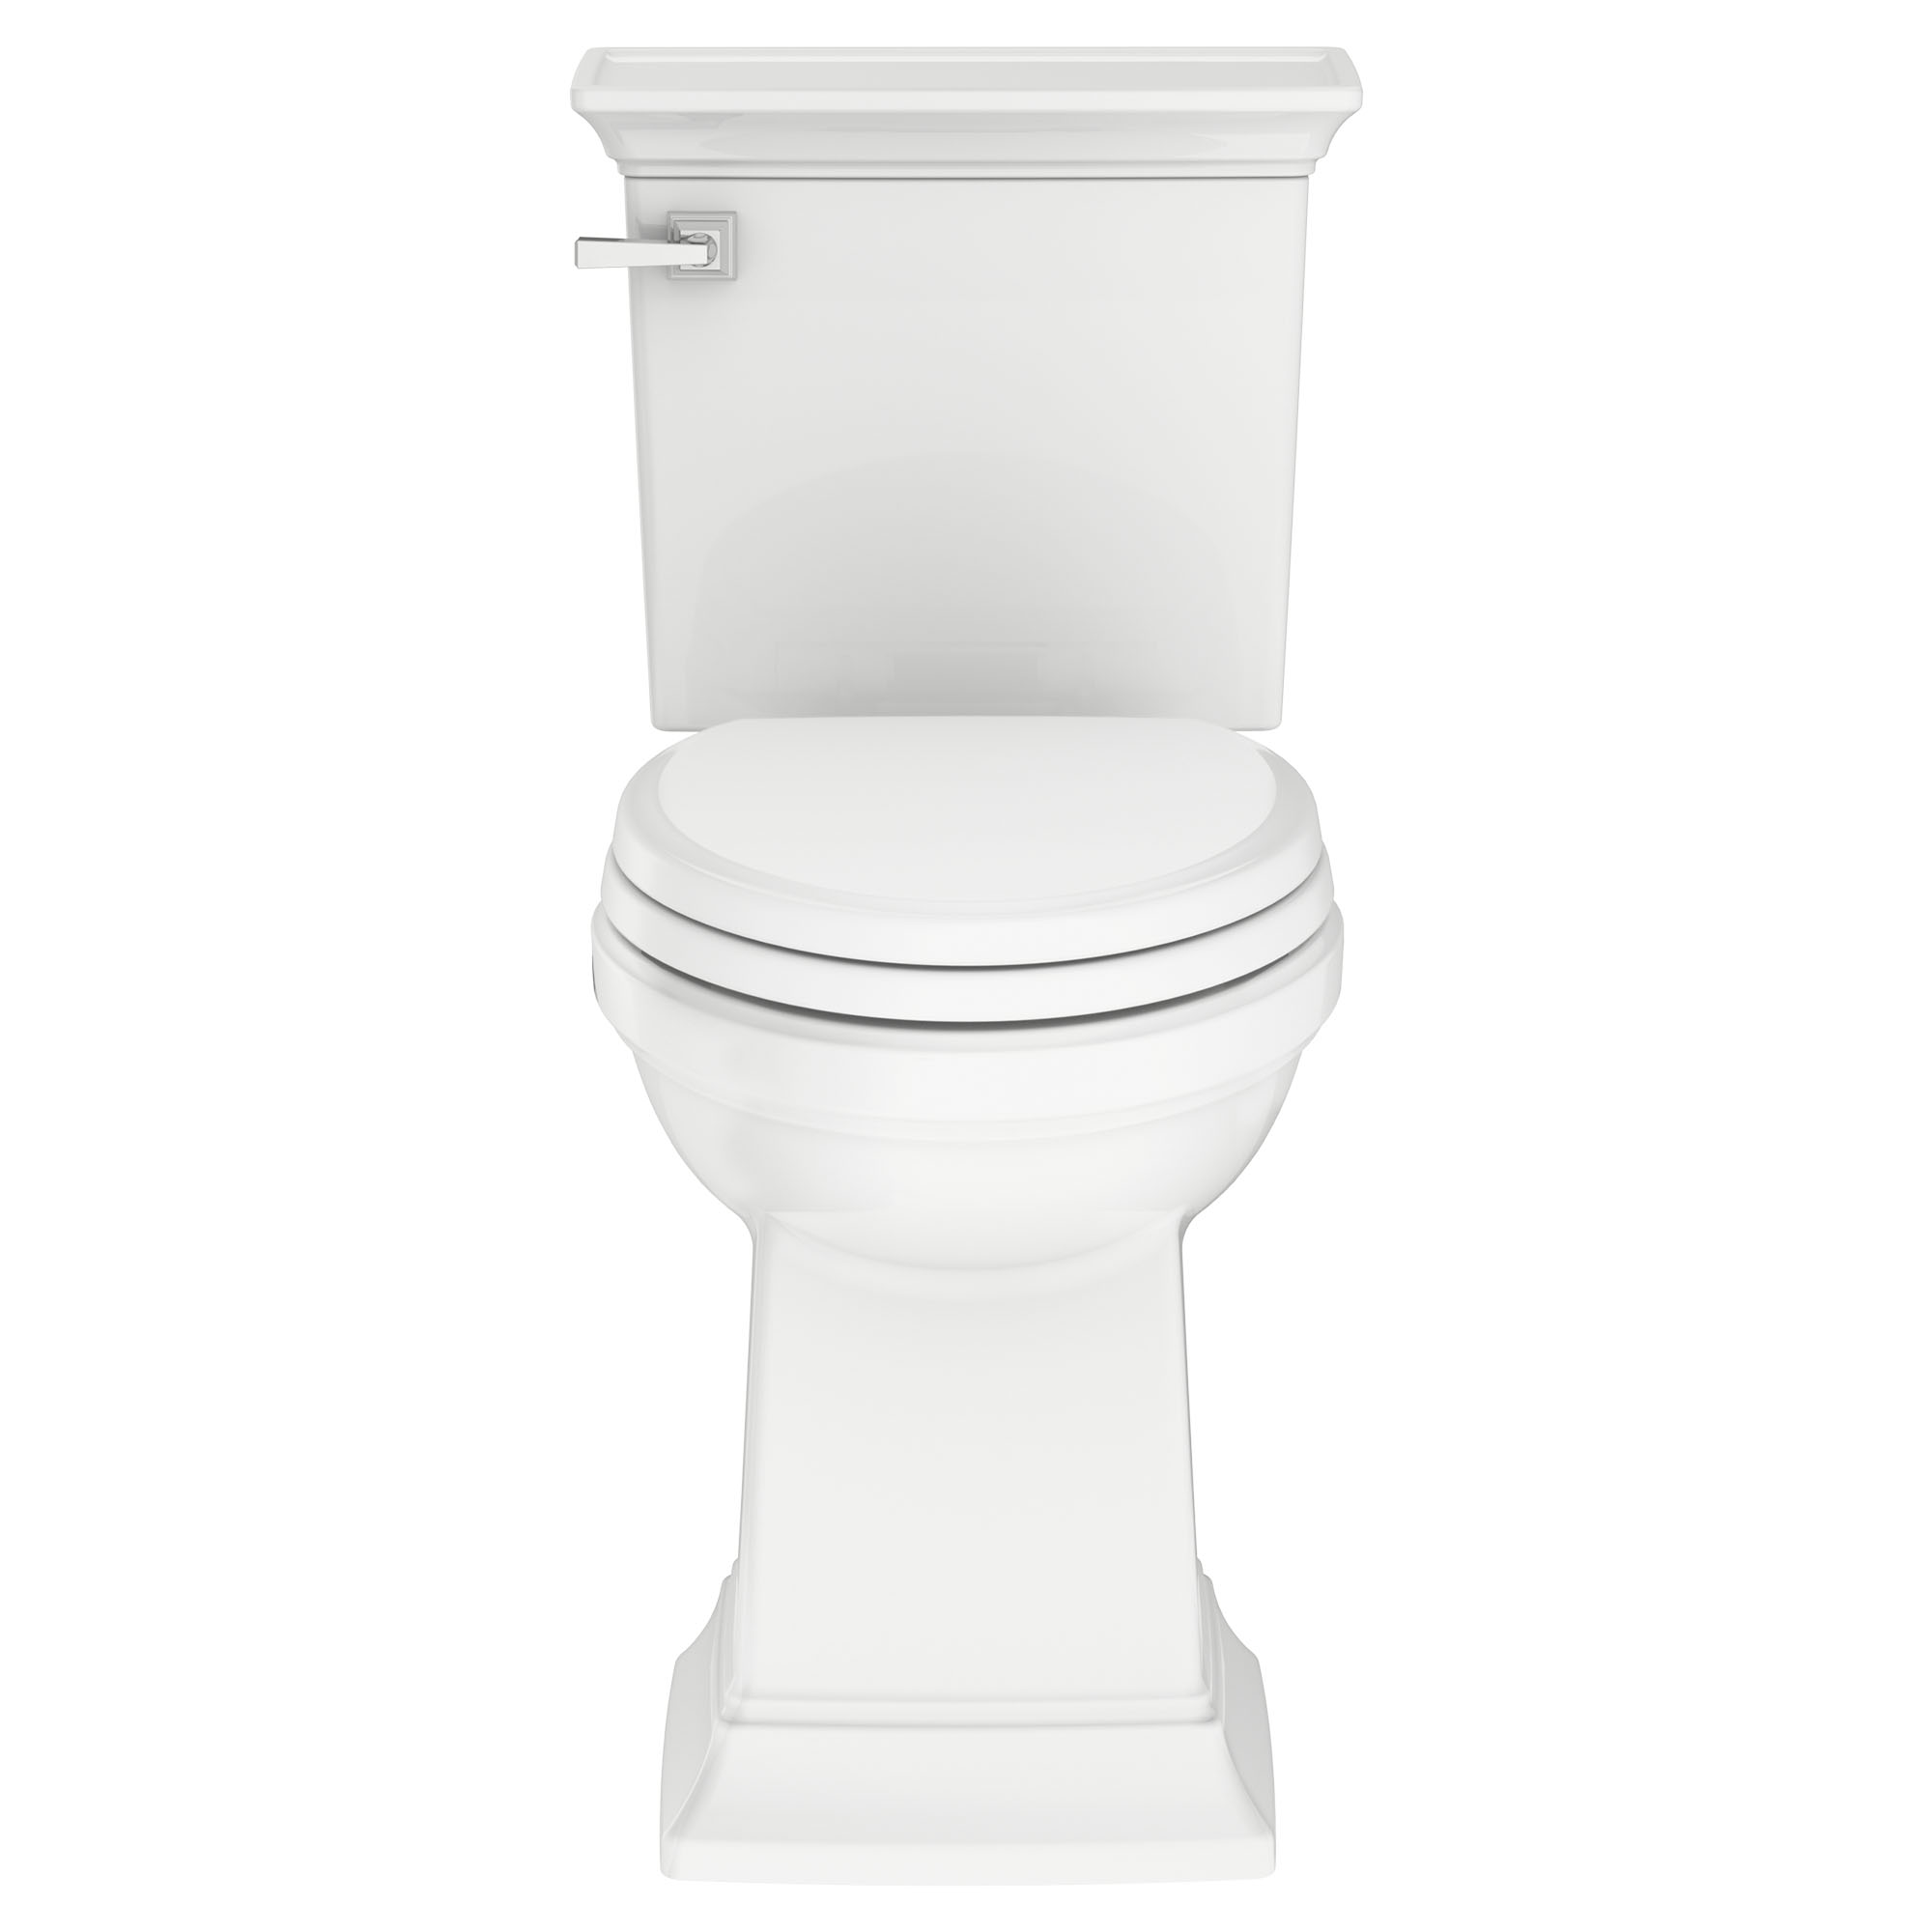 Town Square® S Two-Piece 1.28 gpf/4.8 Lpf Chair Height Elongated Toilet Less Seat